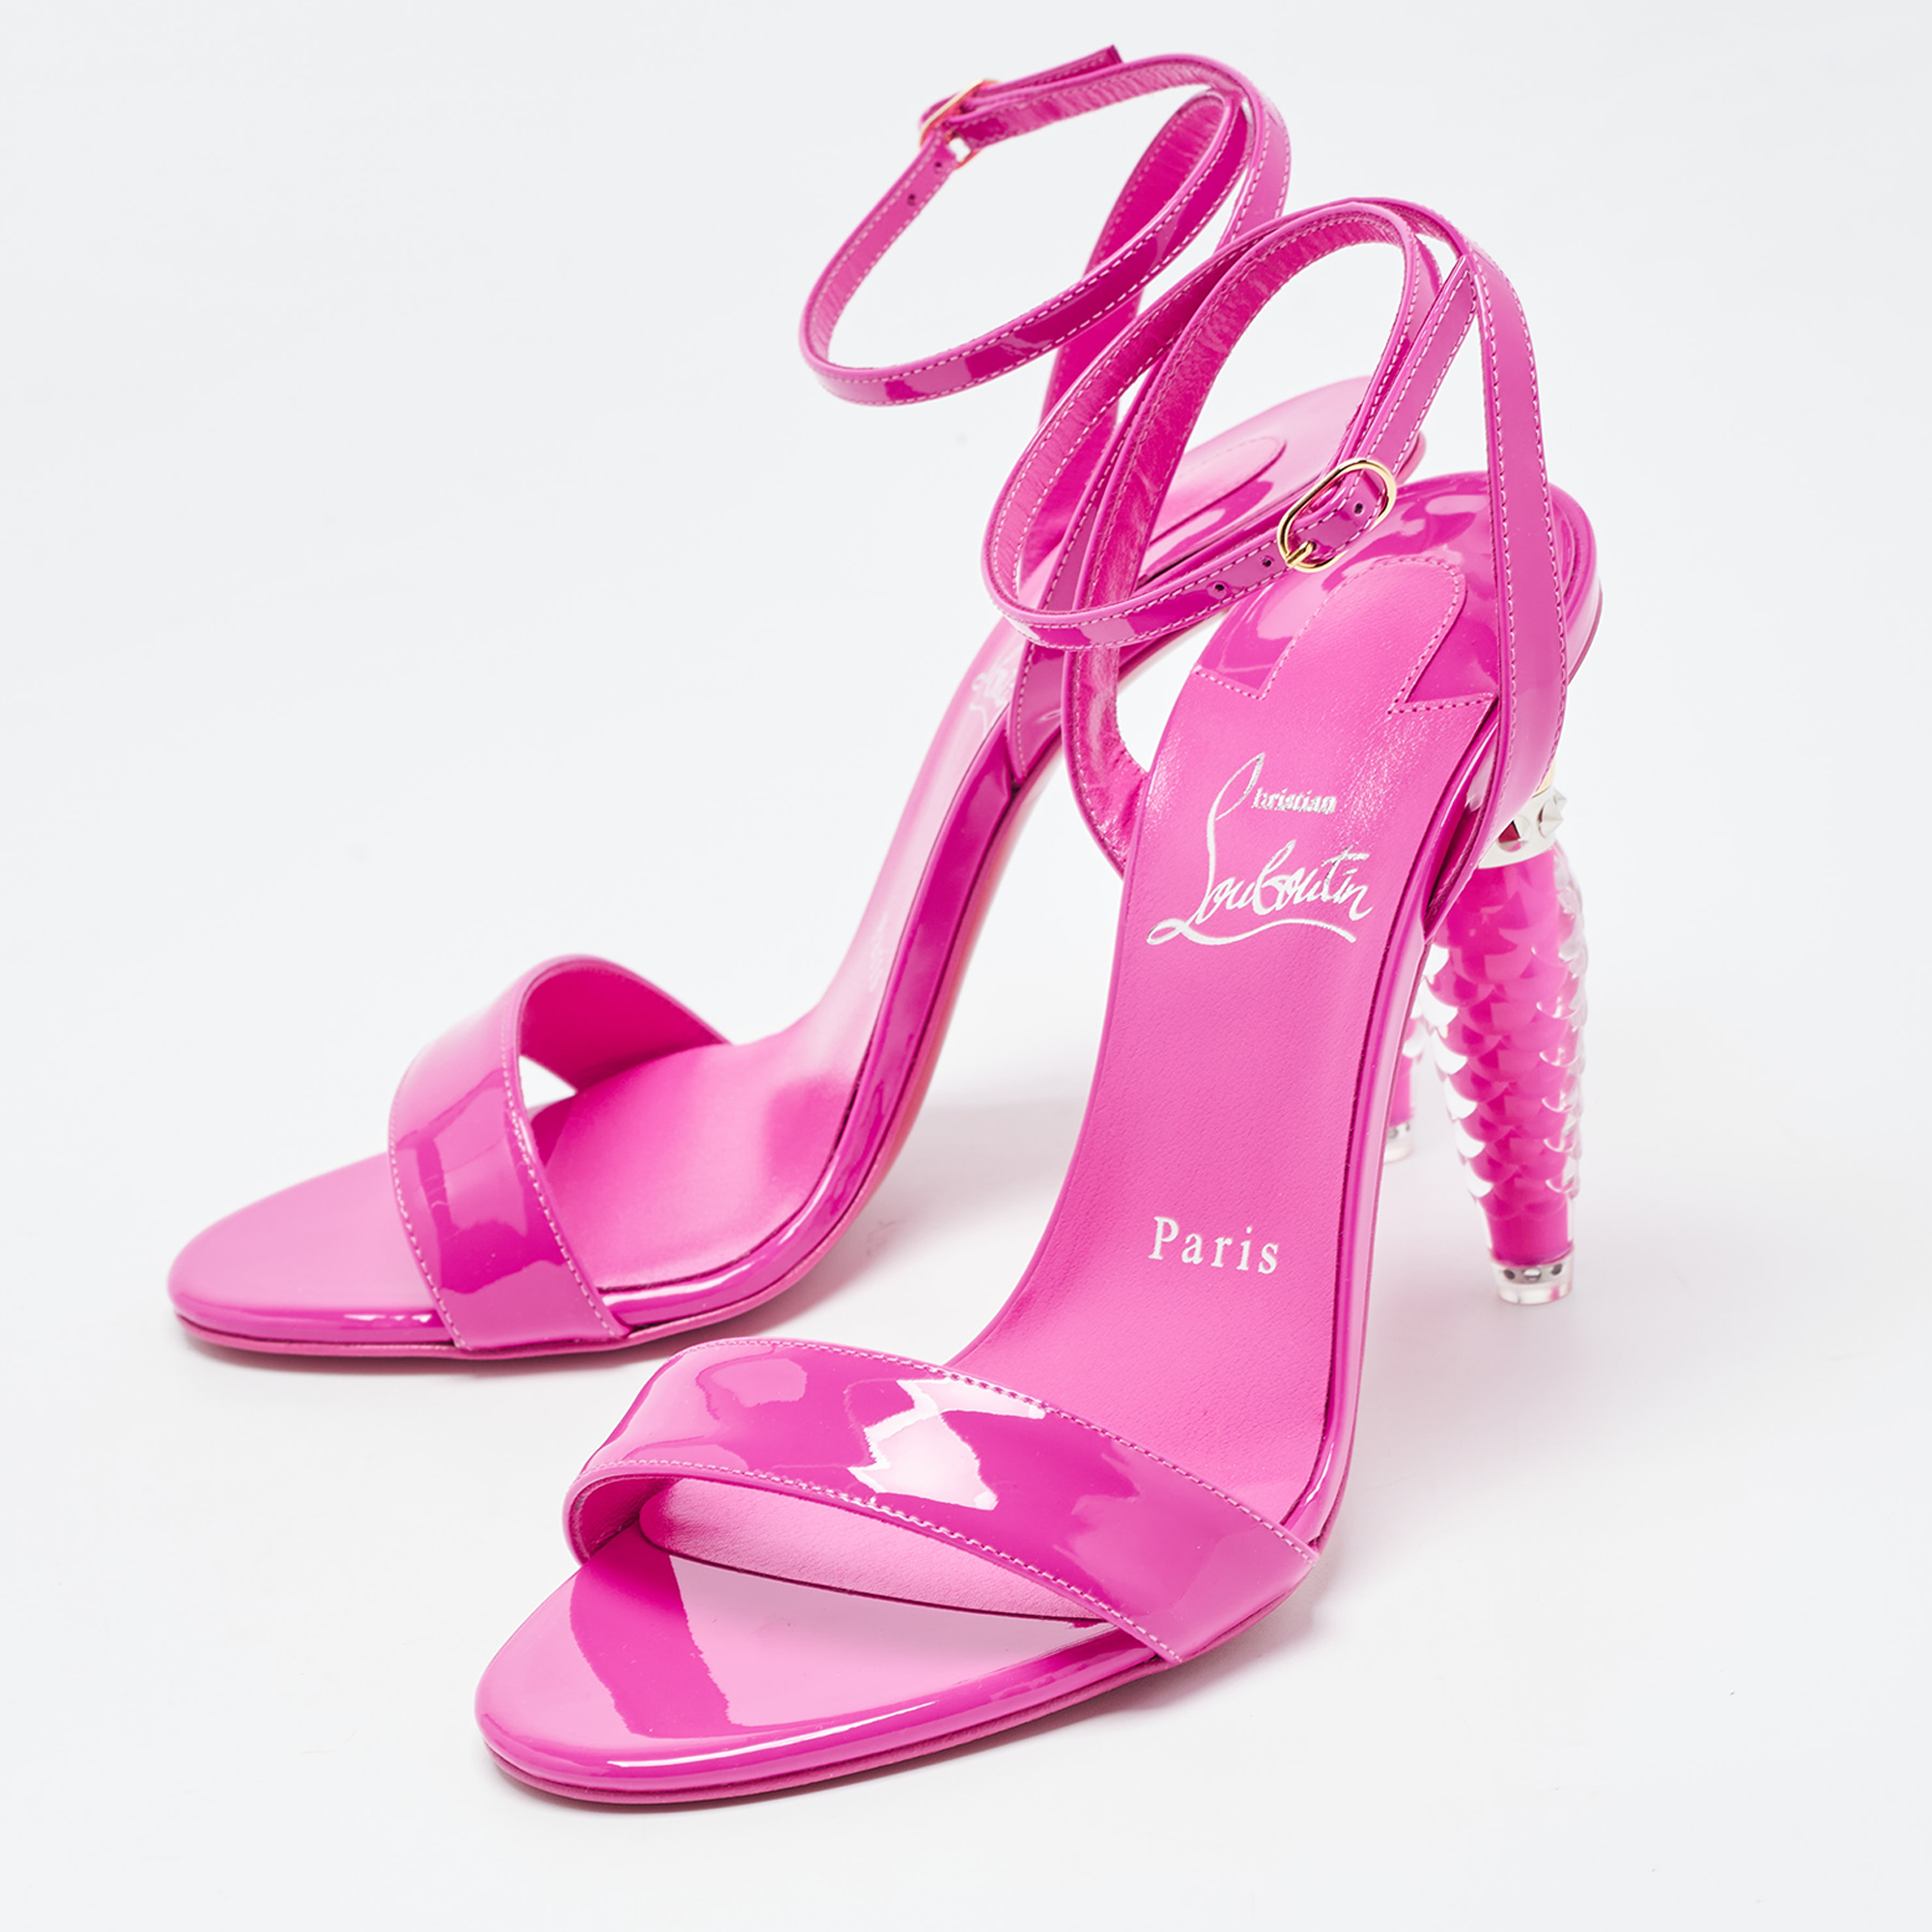 

Christian Louboutin Fuchsia Patent Leather Lipgloss Queen Ankle Strap Sandals Size, Pink